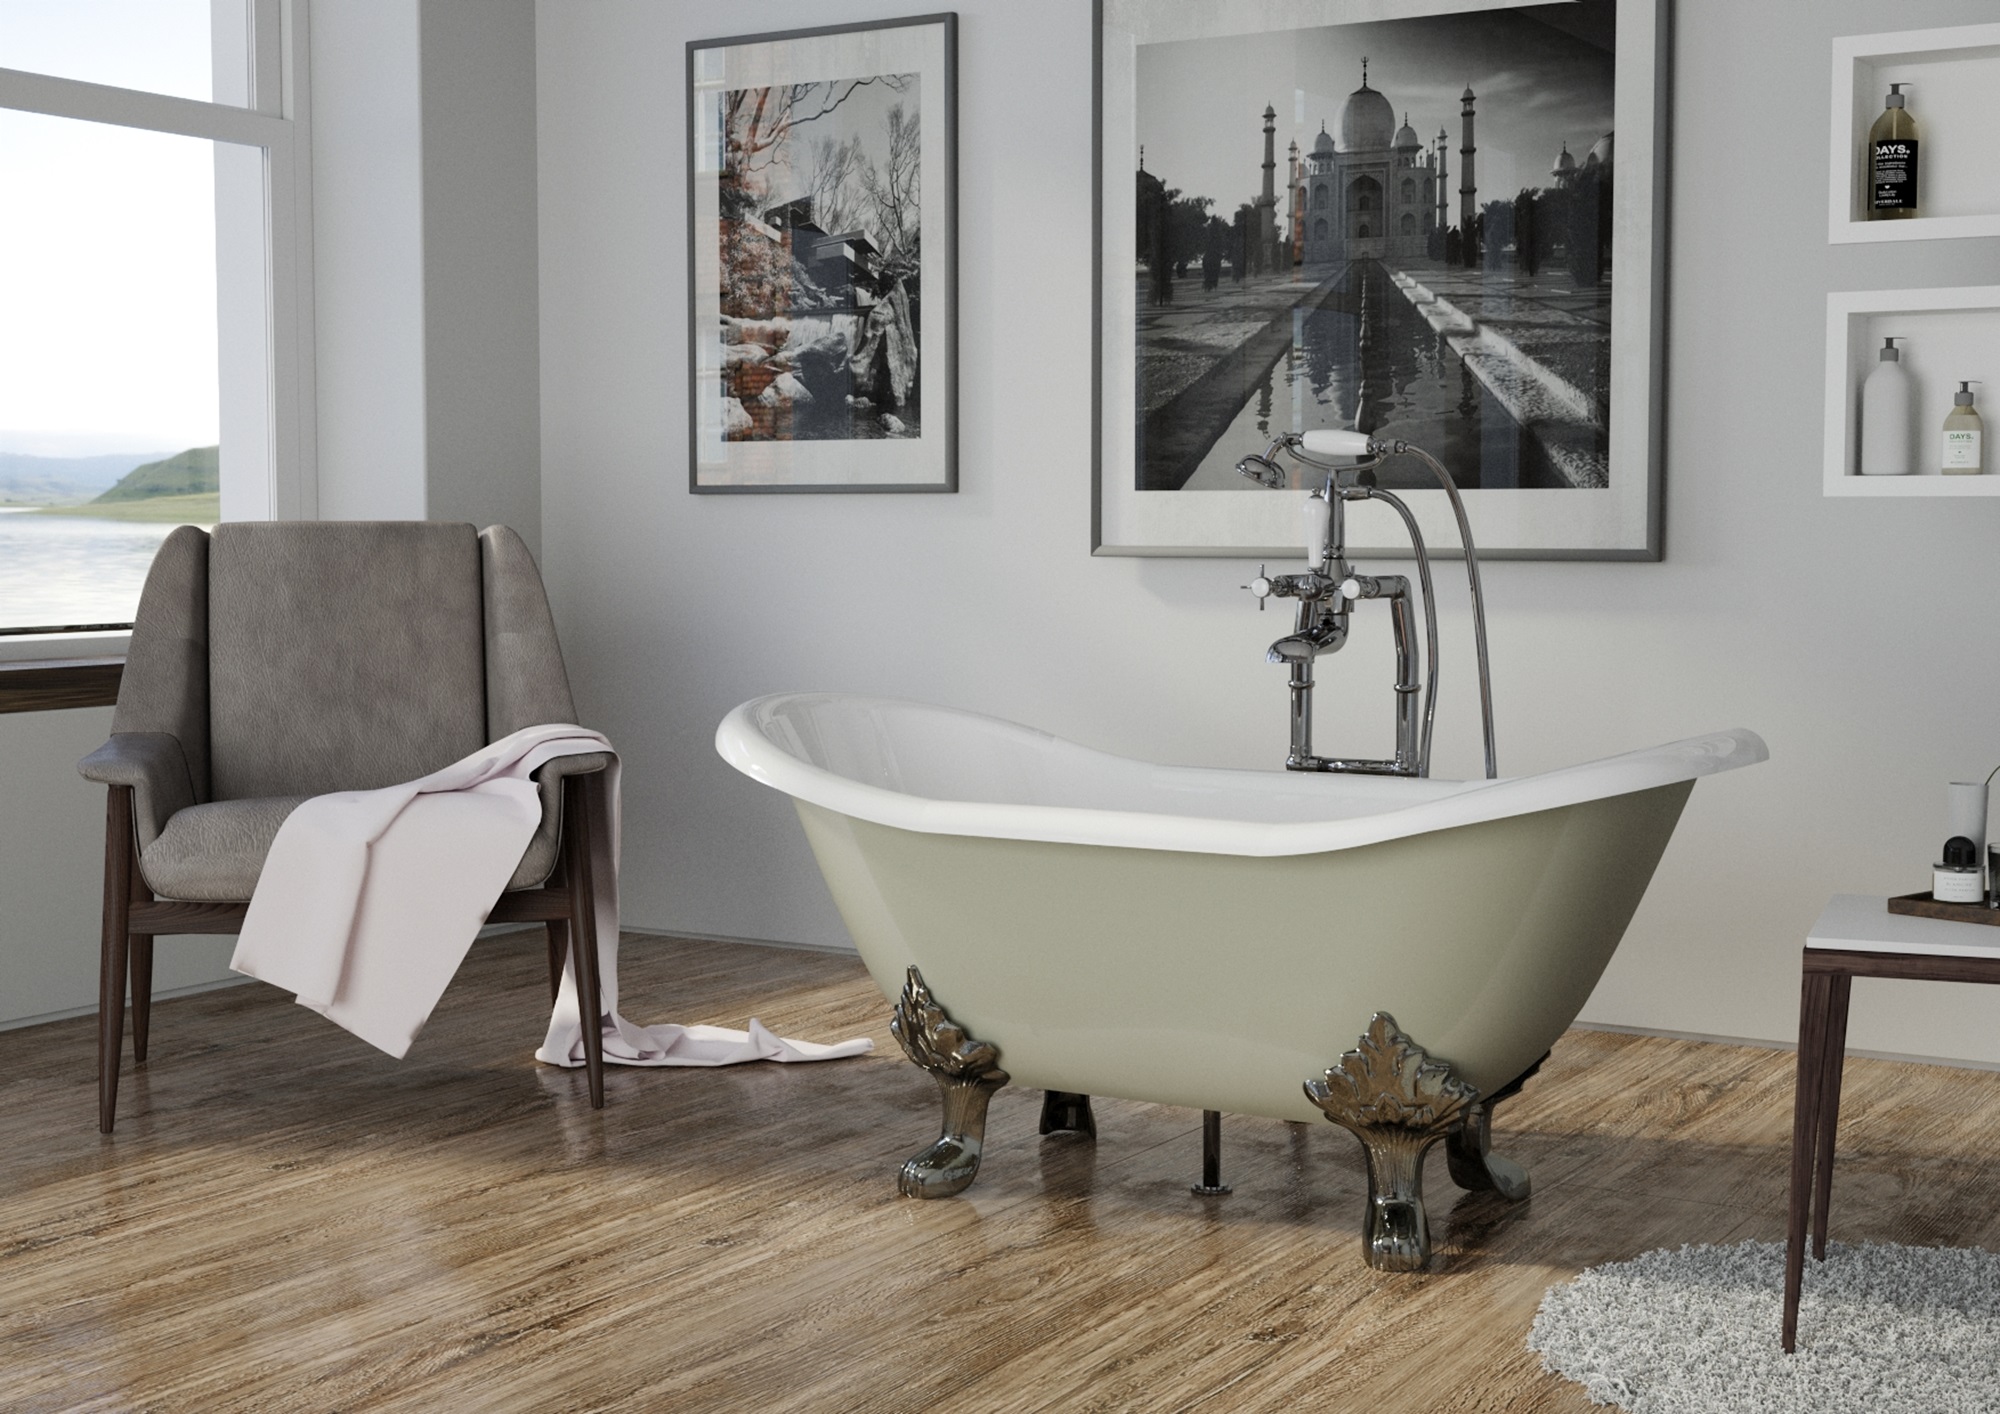 Renaissance at Home Unveils Roll Top Baths Inspired by Classic Poets